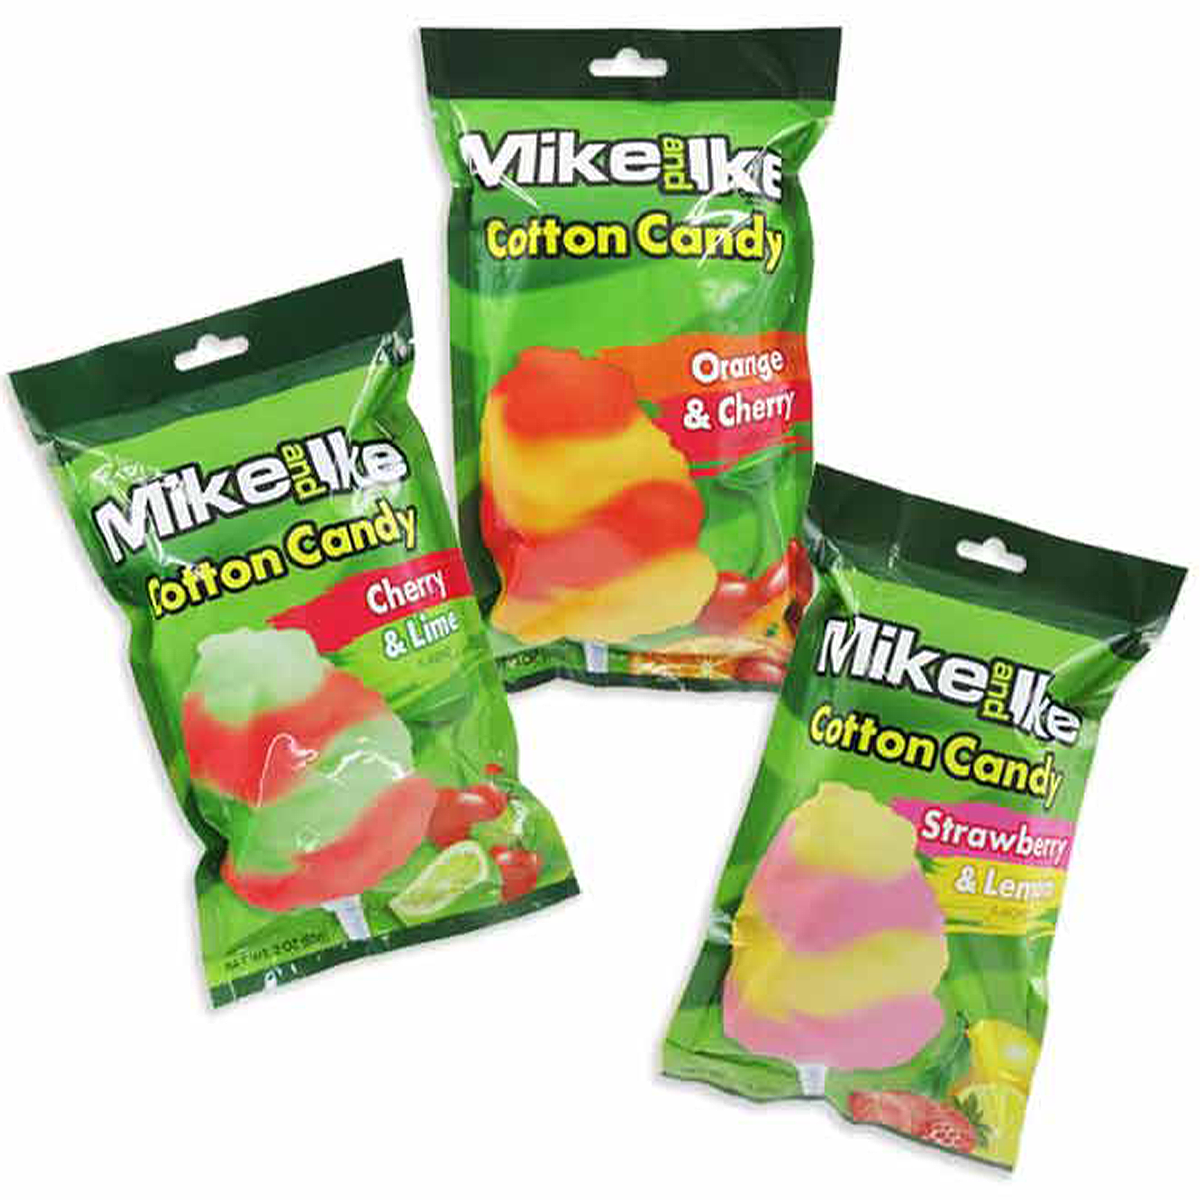 Mike & Ike Cotton Candy Assorted Flavors